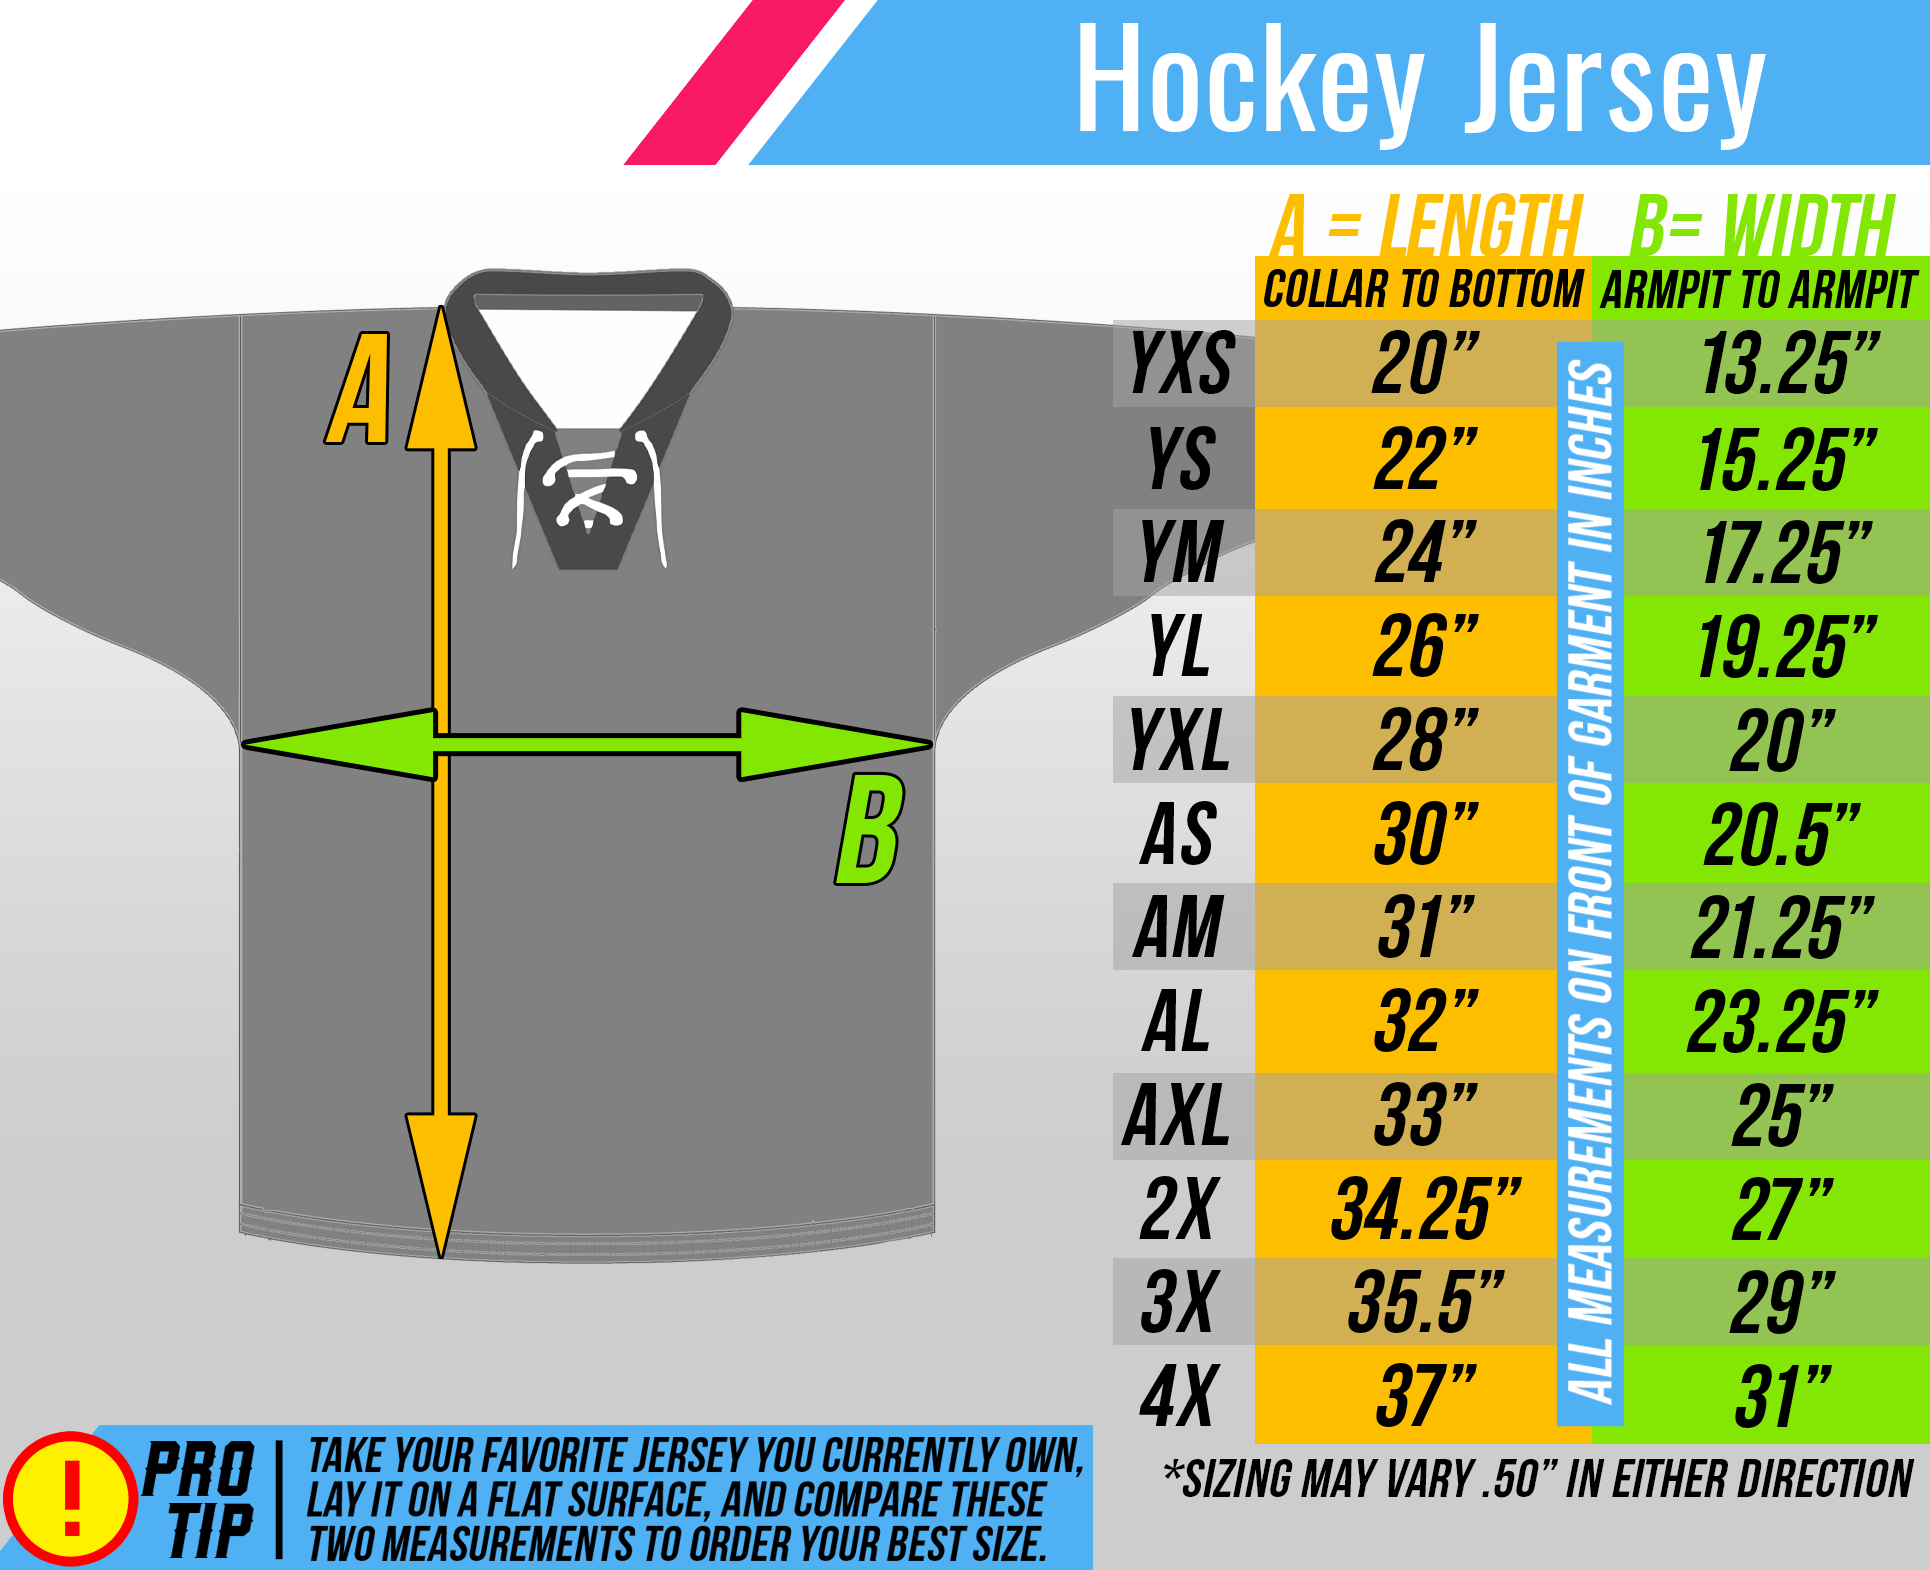 Flying Squirrels Christmas Vacation Hockey Jersey